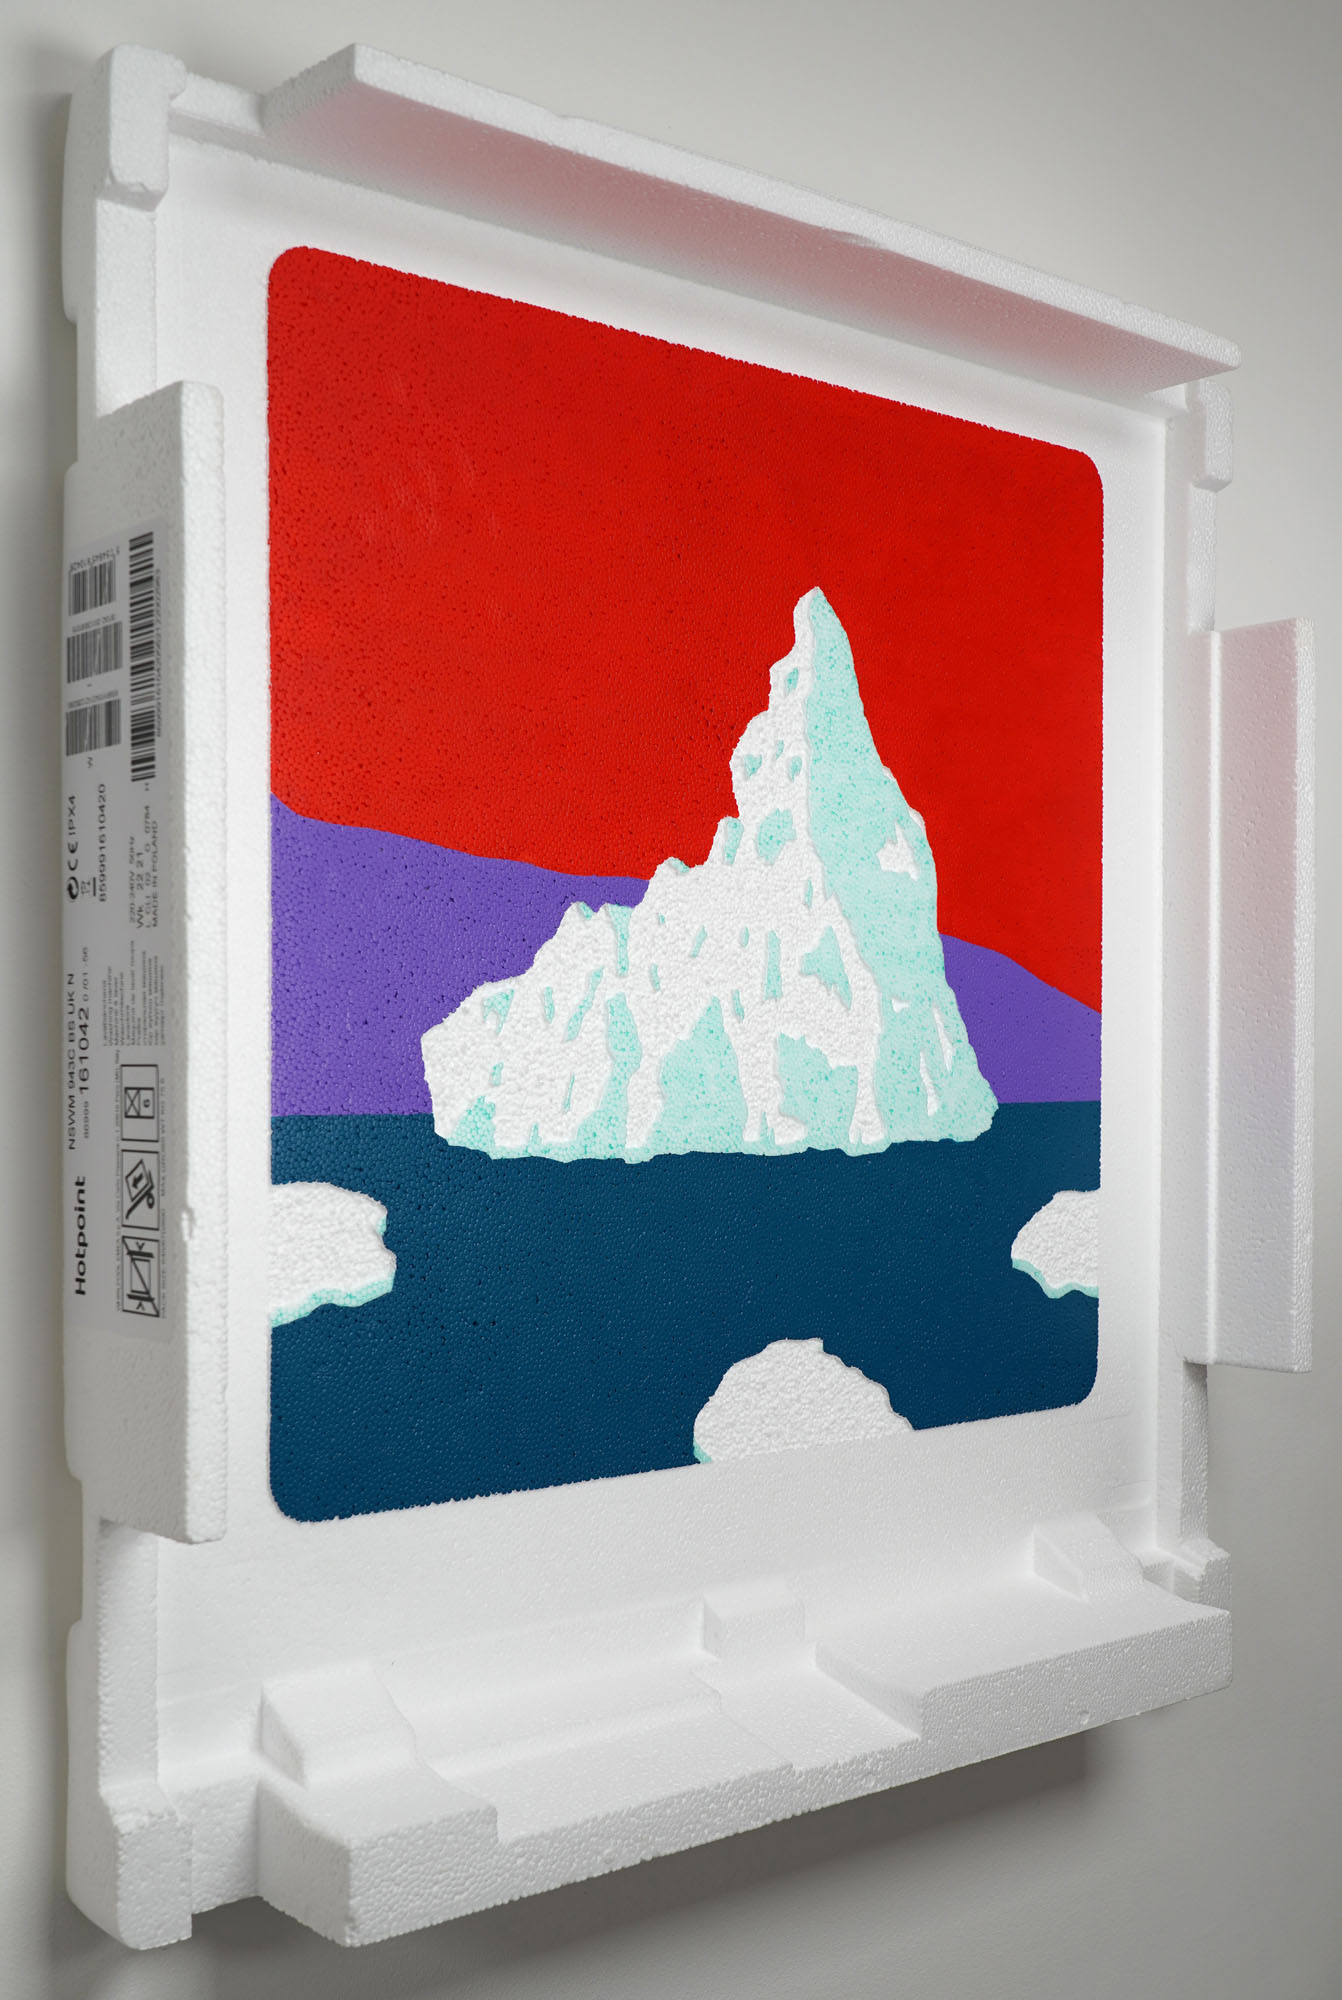 An iceberg with a bright three colour background has been painted and picked onto the surface of some reclaimed polystyrene packaging (with the label 'Hotpoint' on the side).   